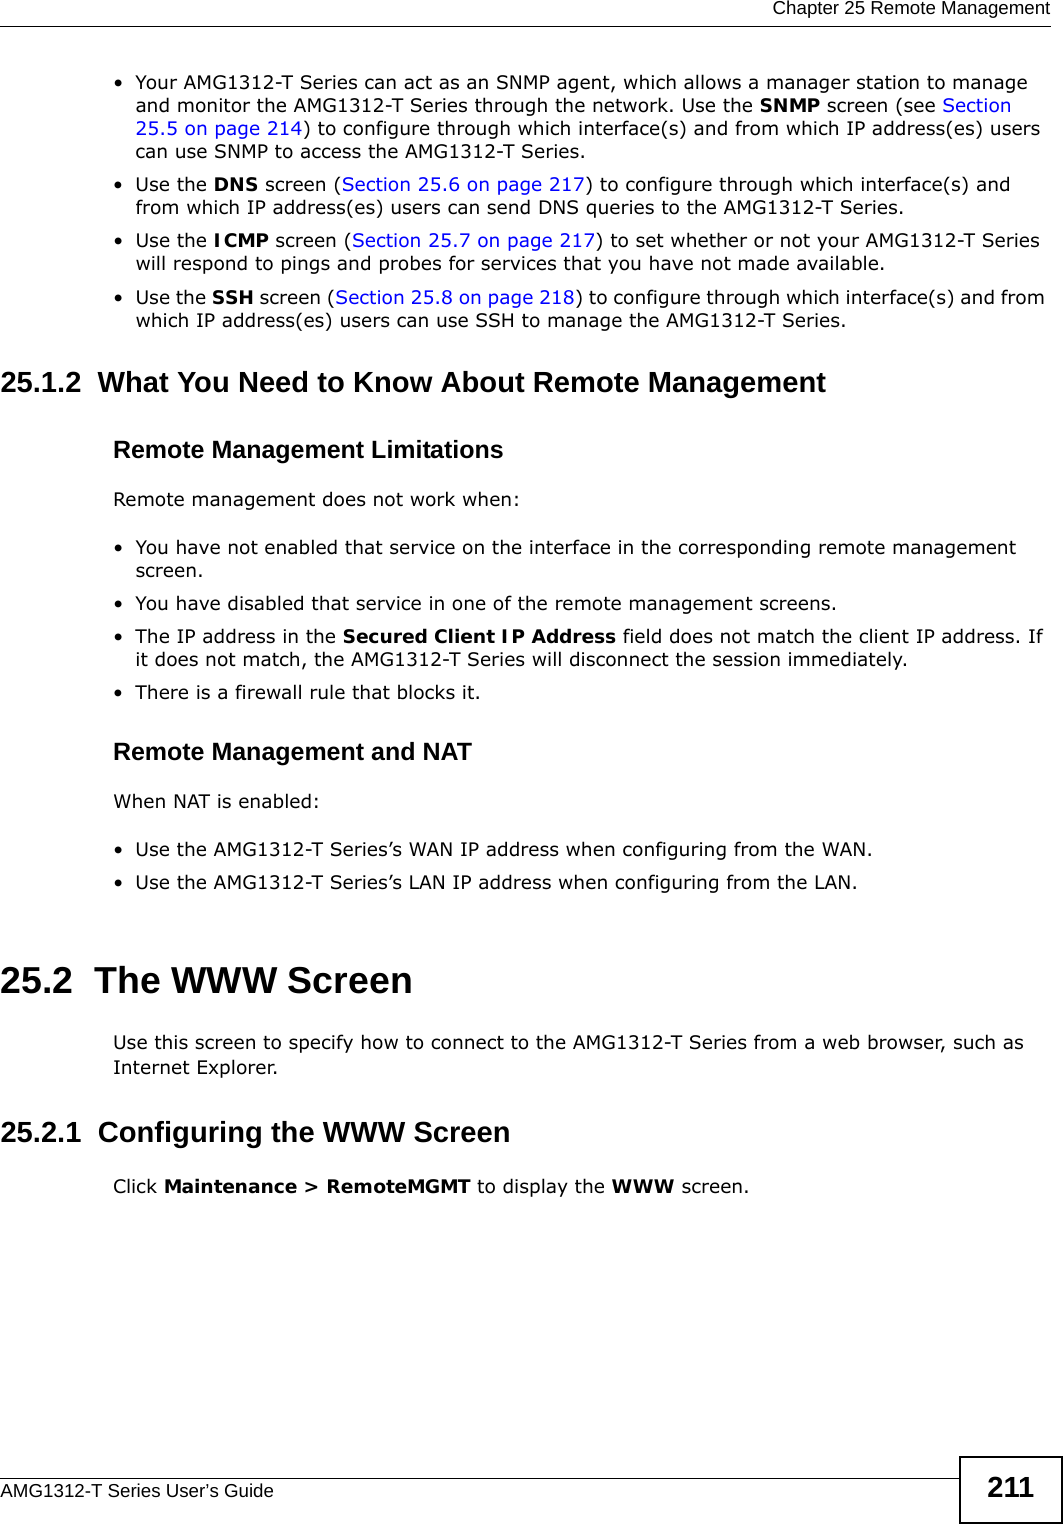  Chapter 25 Remote ManagementAMG1312-T Series User’s Guide 211• Your AMG1312-T Series can act as an SNMP agent, which allows a manager station to manage and monitor the AMG1312-T Series through the network. Use the SNMP screen (see Section 25.5 on page 214) to configure through which interface(s) and from which IP address(es) users can use SNMP to access the AMG1312-T Series.•Use the DNS screen (Section 25.6 on page 217) to configure through which interface(s) and from which IP address(es) users can send DNS queries to the AMG1312-T Series.•Use the ICMP screen (Section 25.7 on page 217) to set whether or not your AMG1312-T Series will respond to pings and probes for services that you have not made available.•Use the SSH screen (Section 25.8 on page 218) to configure through which interface(s) and from which IP address(es) users can use SSH to manage the AMG1312-T Series.25.1.2  What You Need to Know About Remote ManagementRemote Management LimitationsRemote management does not work when:• You have not enabled that service on the interface in the corresponding remote management screen.• You have disabled that service in one of the remote management screens.• The IP address in the Secured Client IP Address field does not match the client IP address. If it does not match, the AMG1312-T Series will disconnect the session immediately.• There is a firewall rule that blocks it.Remote Management and NATWhen NAT is enabled:• Use the AMG1312-T Series’s WAN IP address when configuring from the WAN. • Use the AMG1312-T Series’s LAN IP address when configuring from the LAN.25.2  The WWW ScreenUse this screen to specify how to connect to the AMG1312-T Series from a web browser, such as Internet Explorer. 25.2.1  Configuring the WWW ScreenClick Maintenance &gt; RemoteMGMT to display the WWW screen.